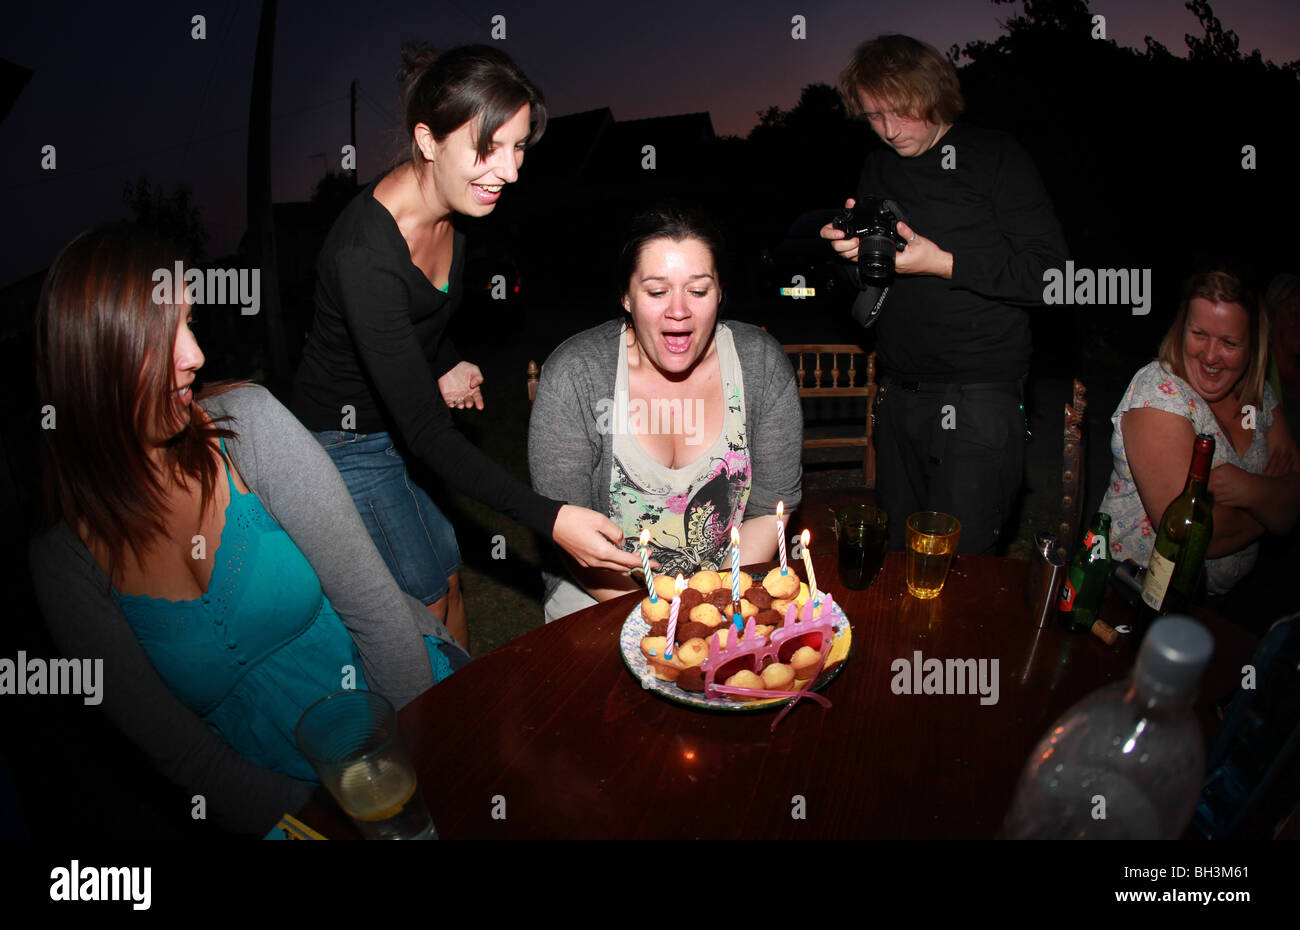 Group of young adults celebrating with a birthday cake outdoors at night. Stock Photo